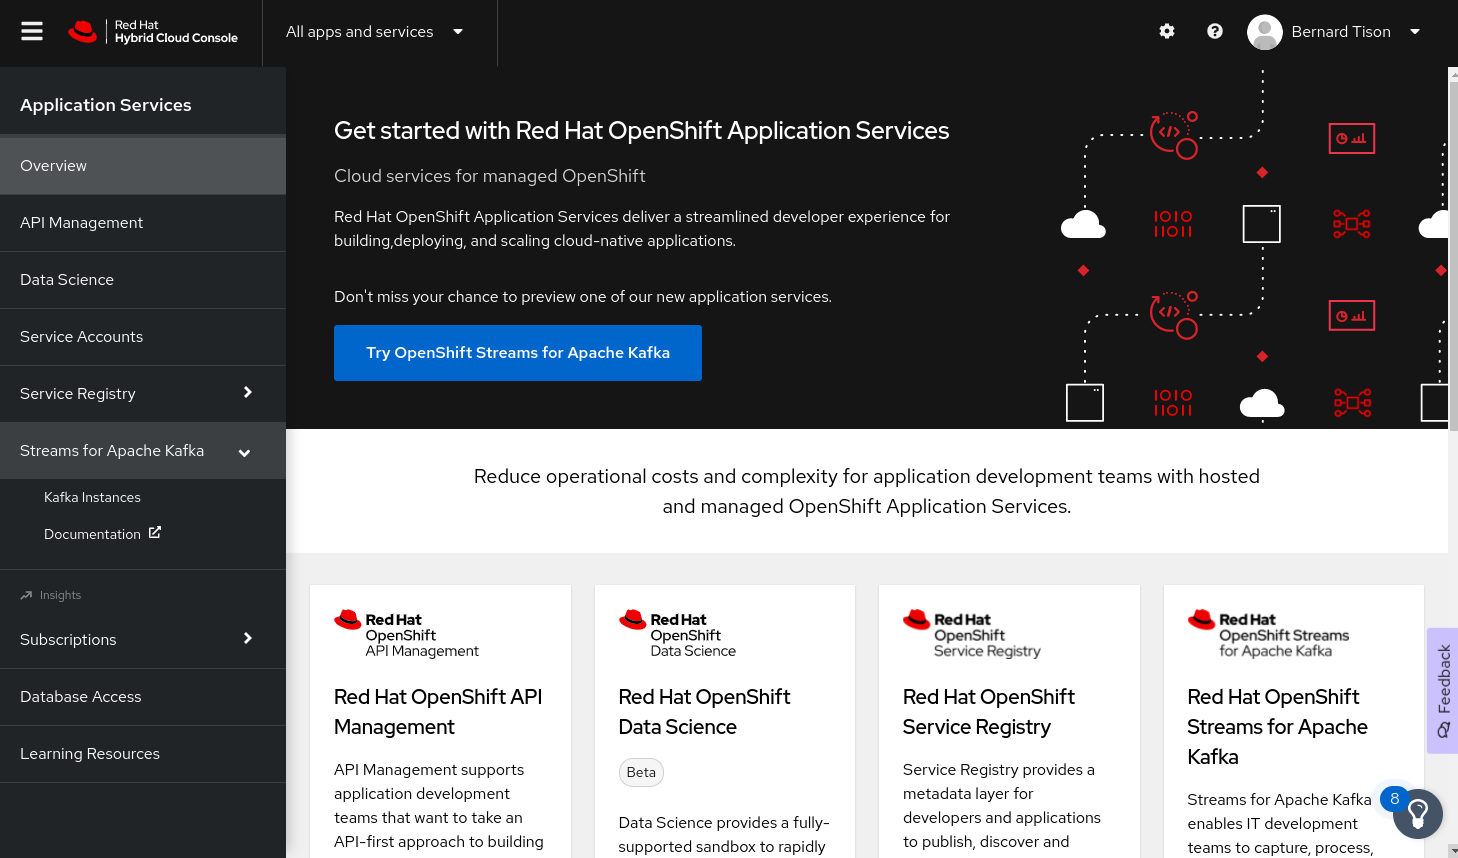 The Application Services landing page on console.redhat.com.